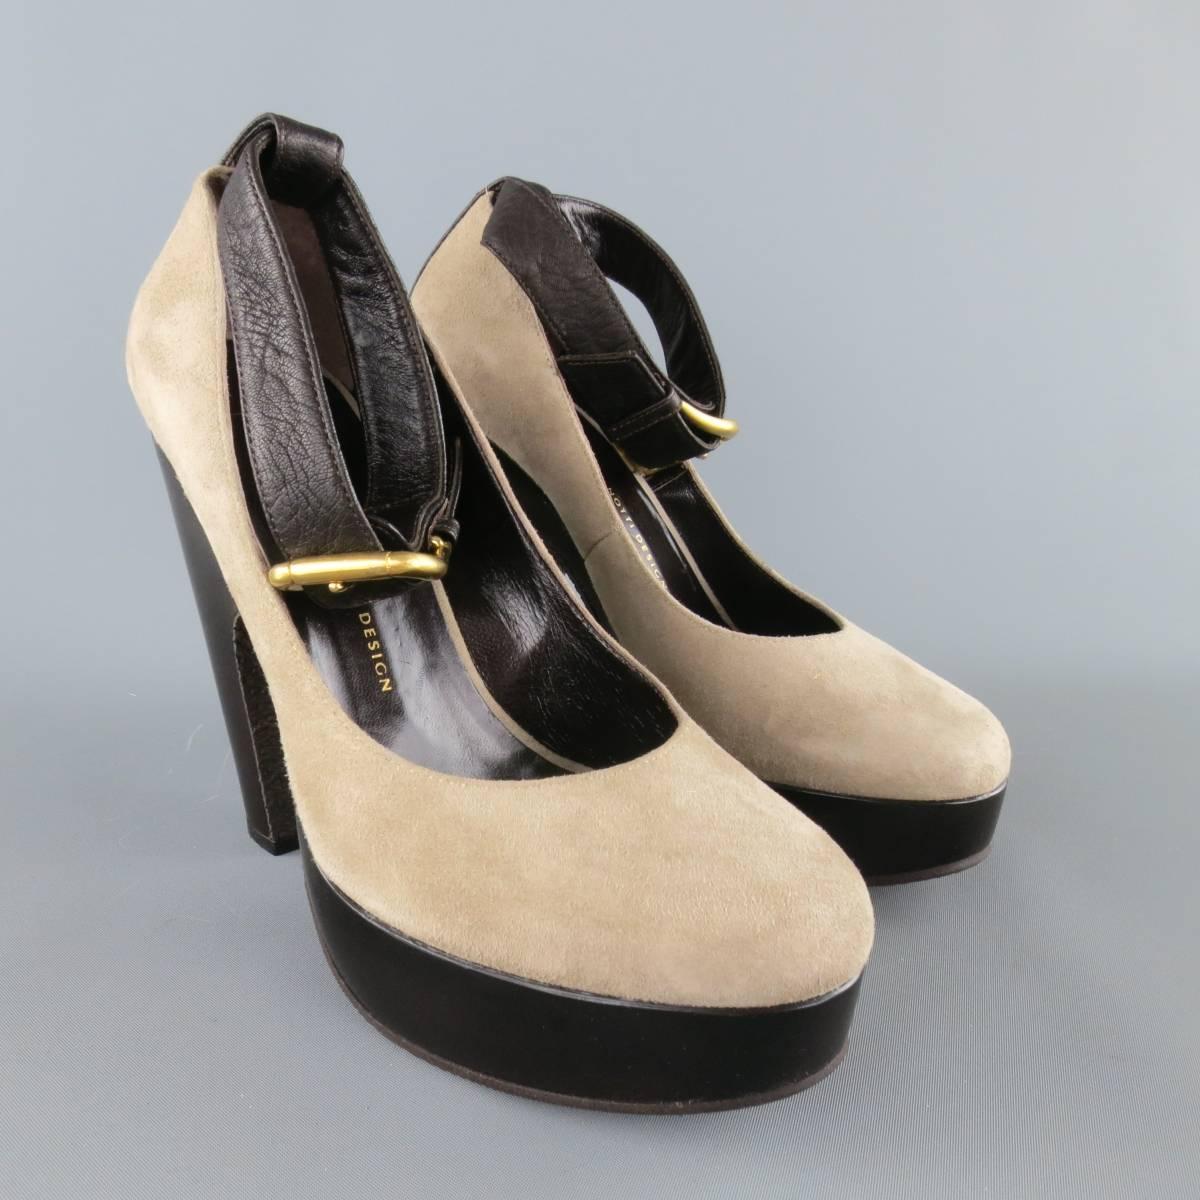 GIUSEPPE ZANOTTI pumps come in light taupe gray suede and feature a round toe, brown leather ankle strap with gold tone buckle, and thick, retro style platform sole. Made in Italy.
 
Excellent Pre-Owned Condition. Retails at $720.00.
Marked: IT 39
